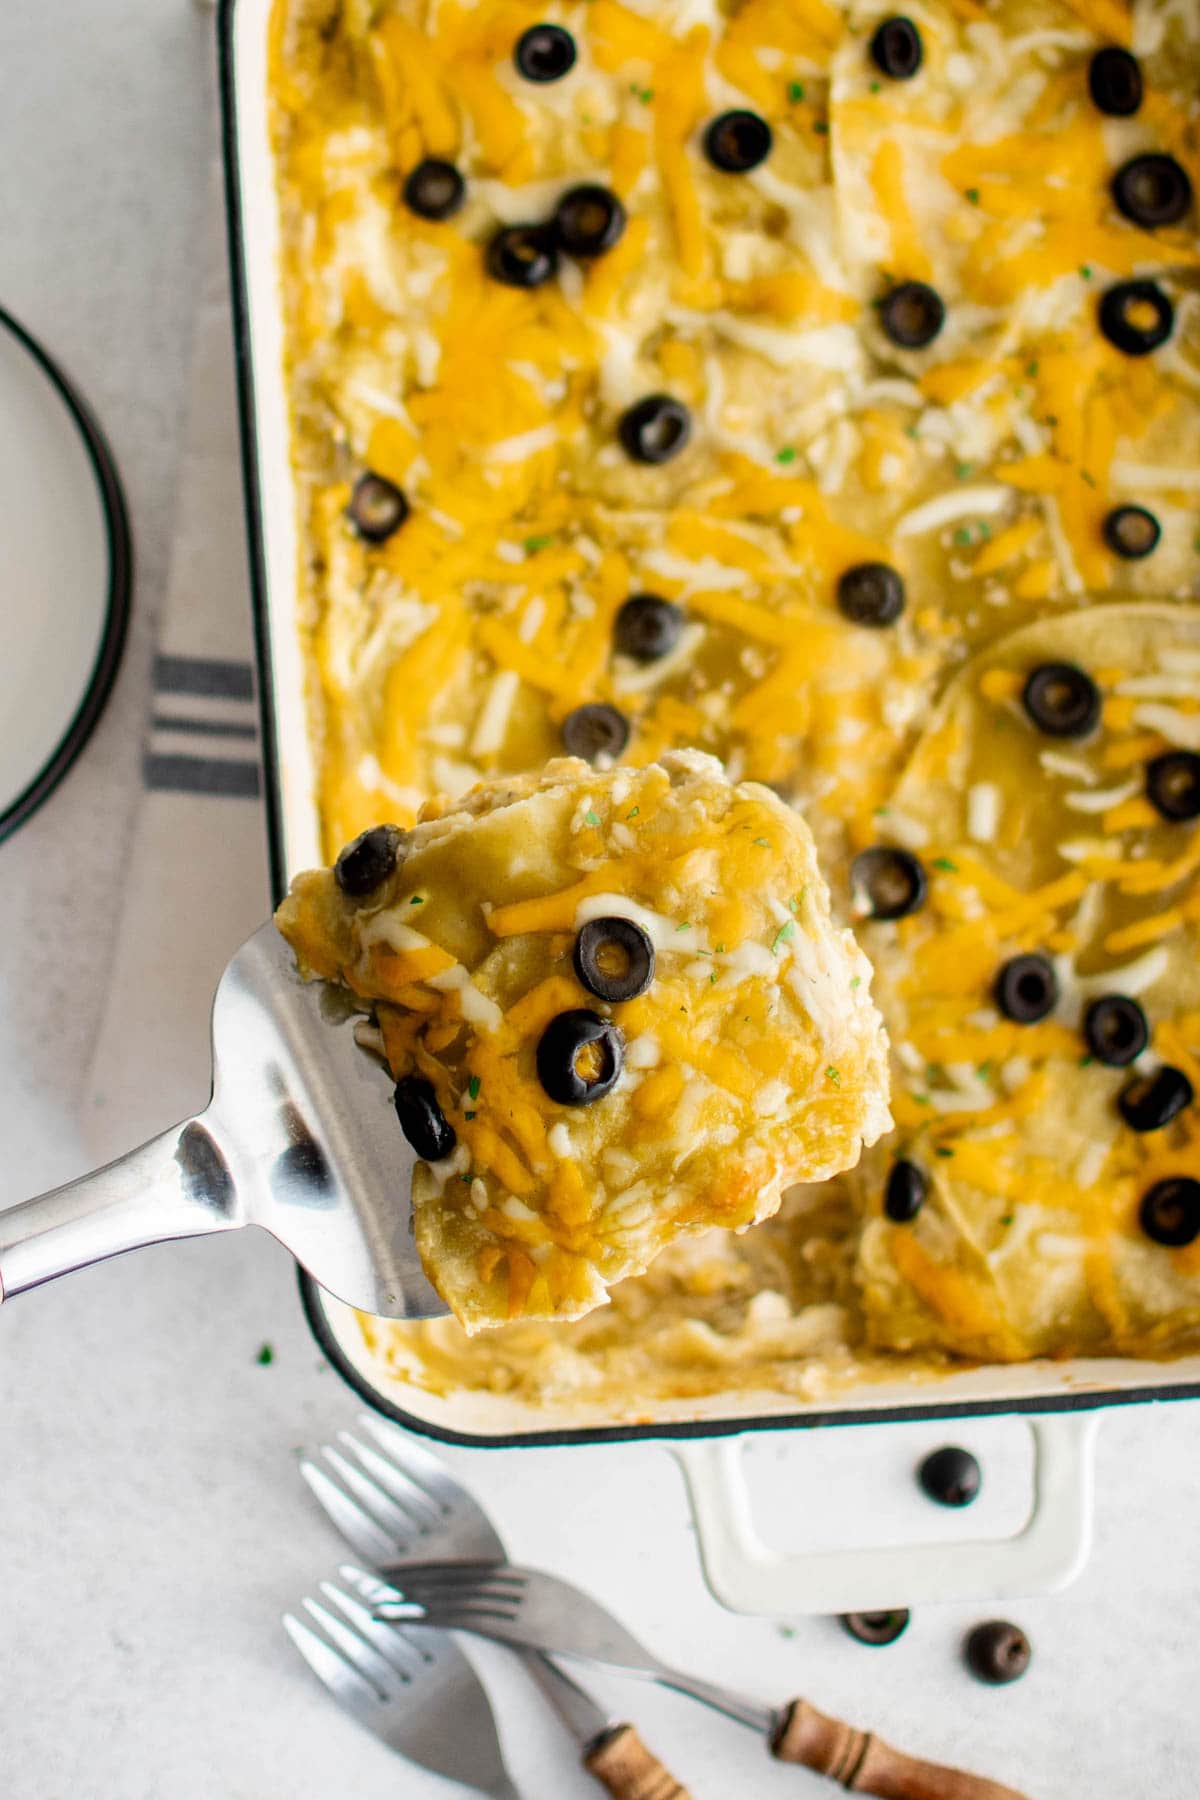 Chicken Enchilada Casserole with green sauce, cheese and olives.